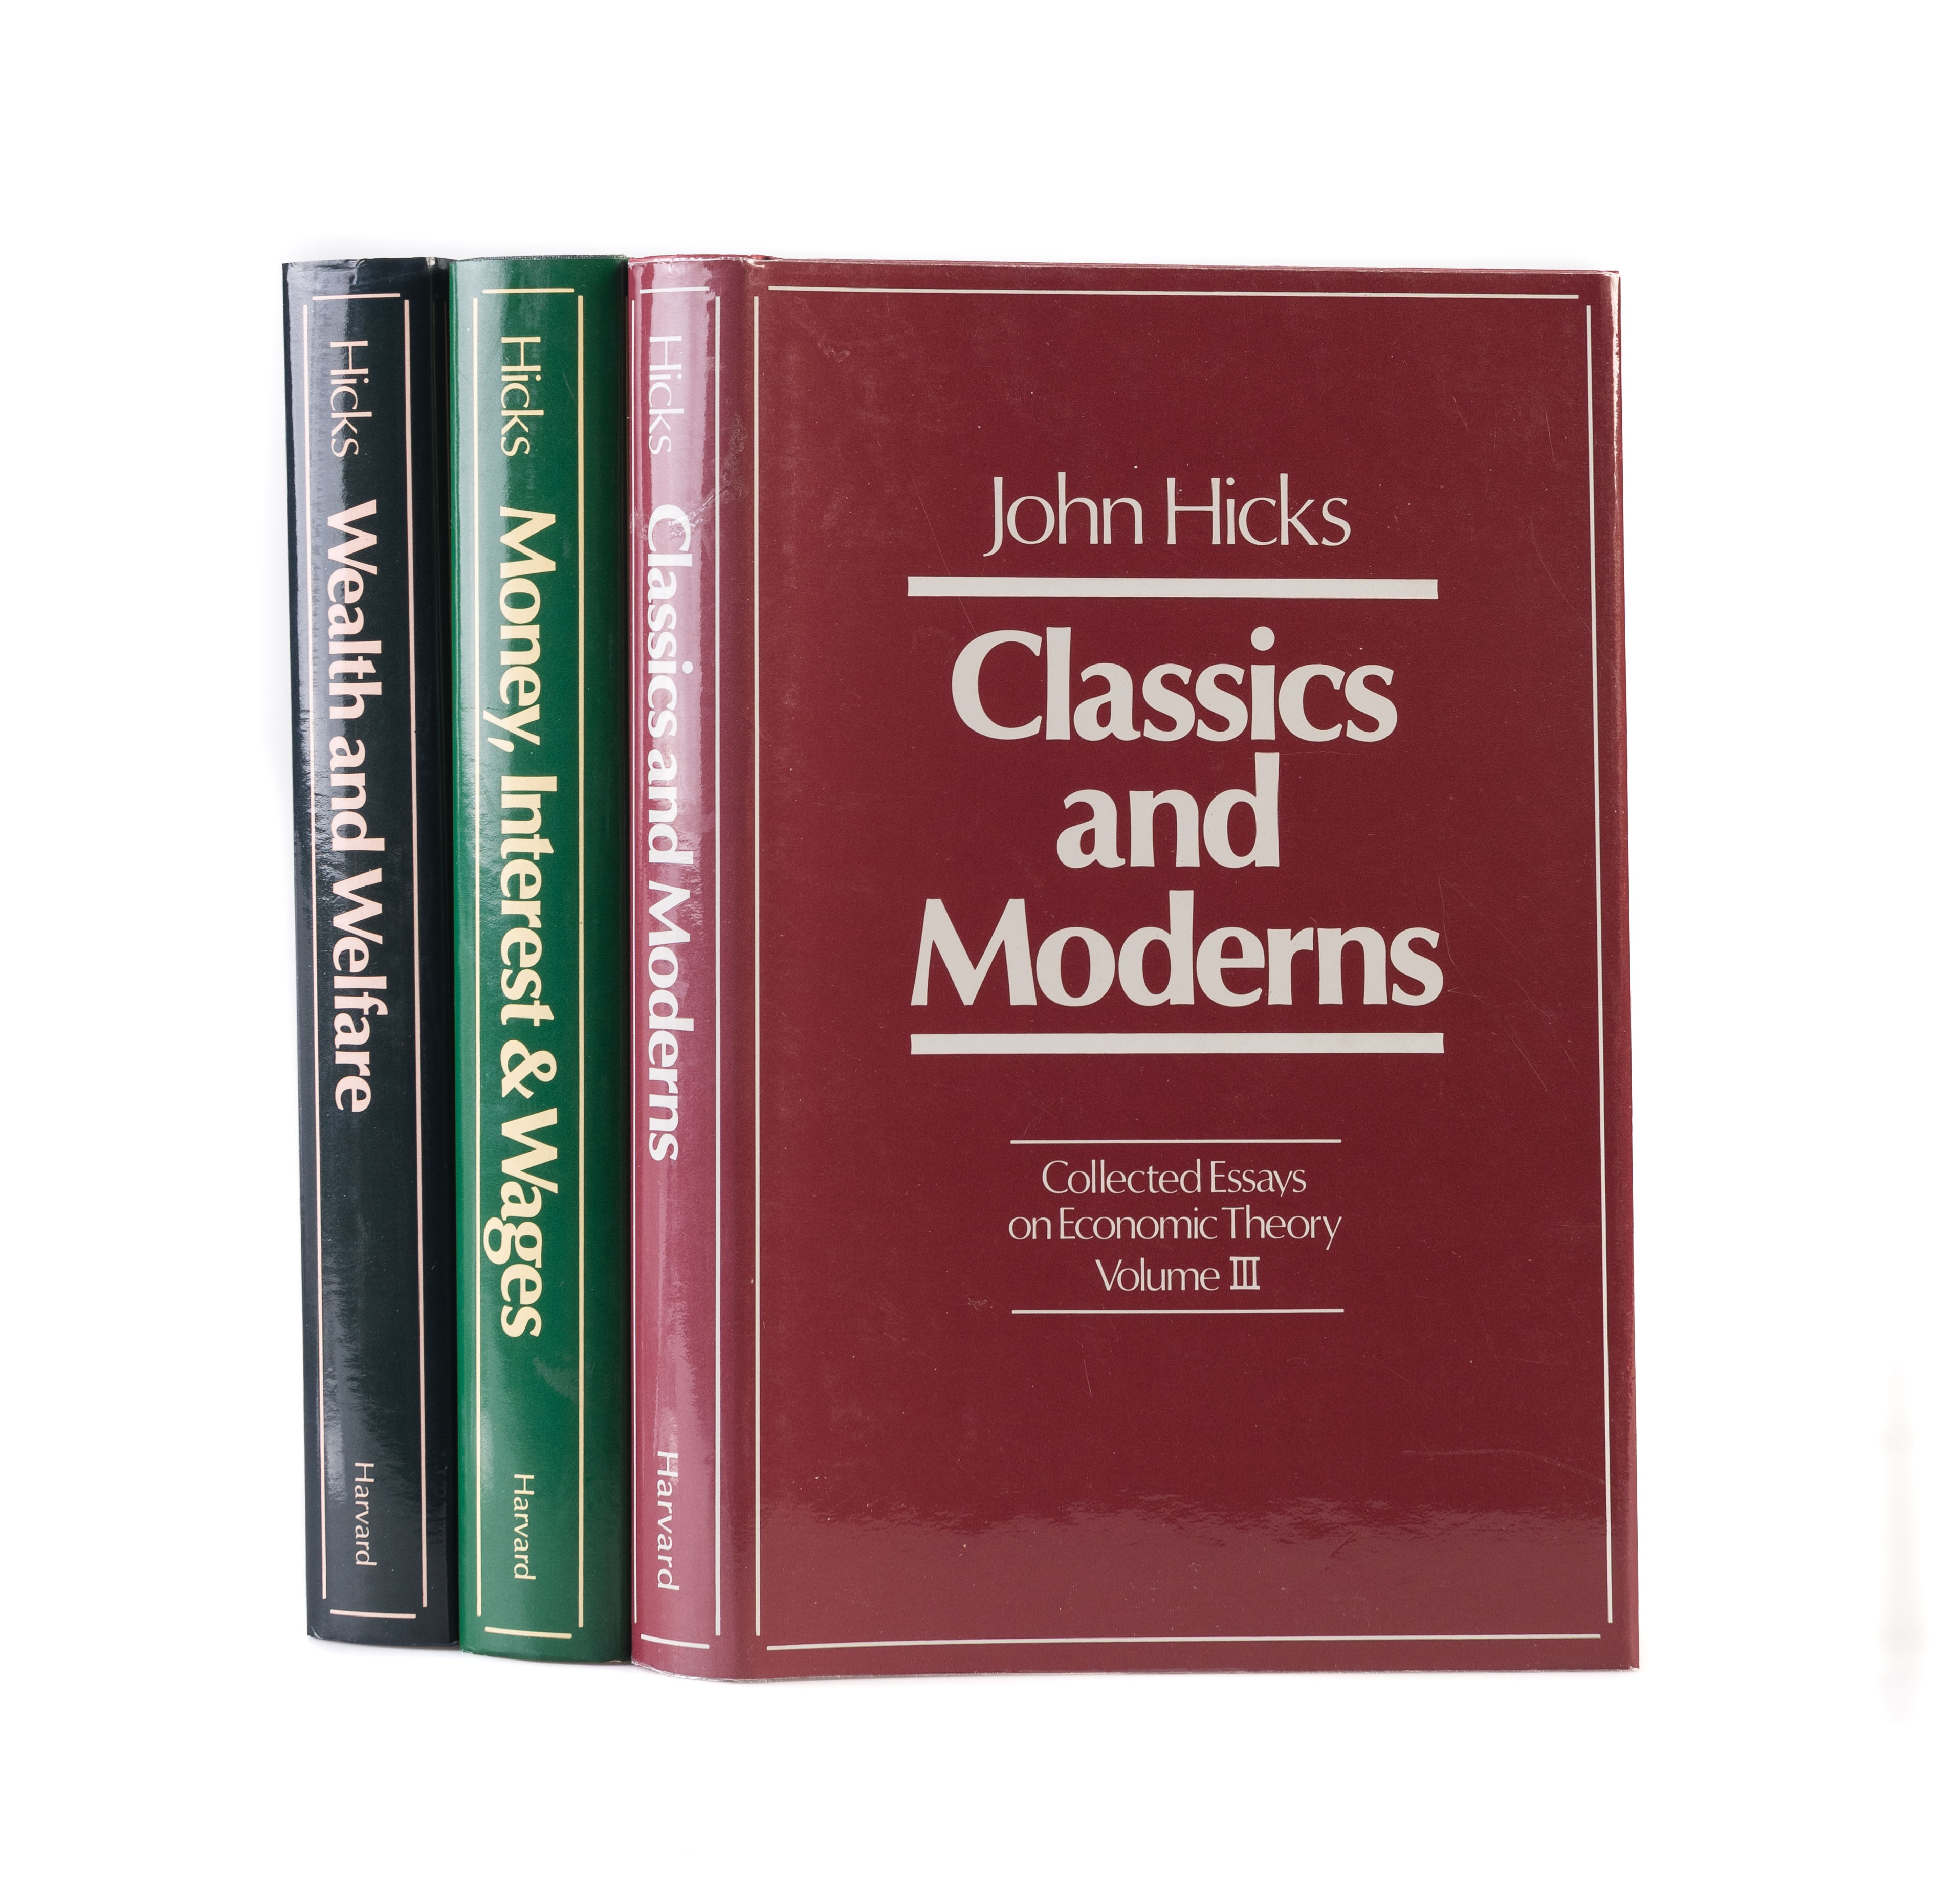 Moderns.　I.　II.　Volume　Collected　Money,　And　On　And　Volume　John　And　III.　Richard　Essays　Wages;　Interest　Classics　Wealth　Economic　Theory:　HICKS　Welfare;　Volume